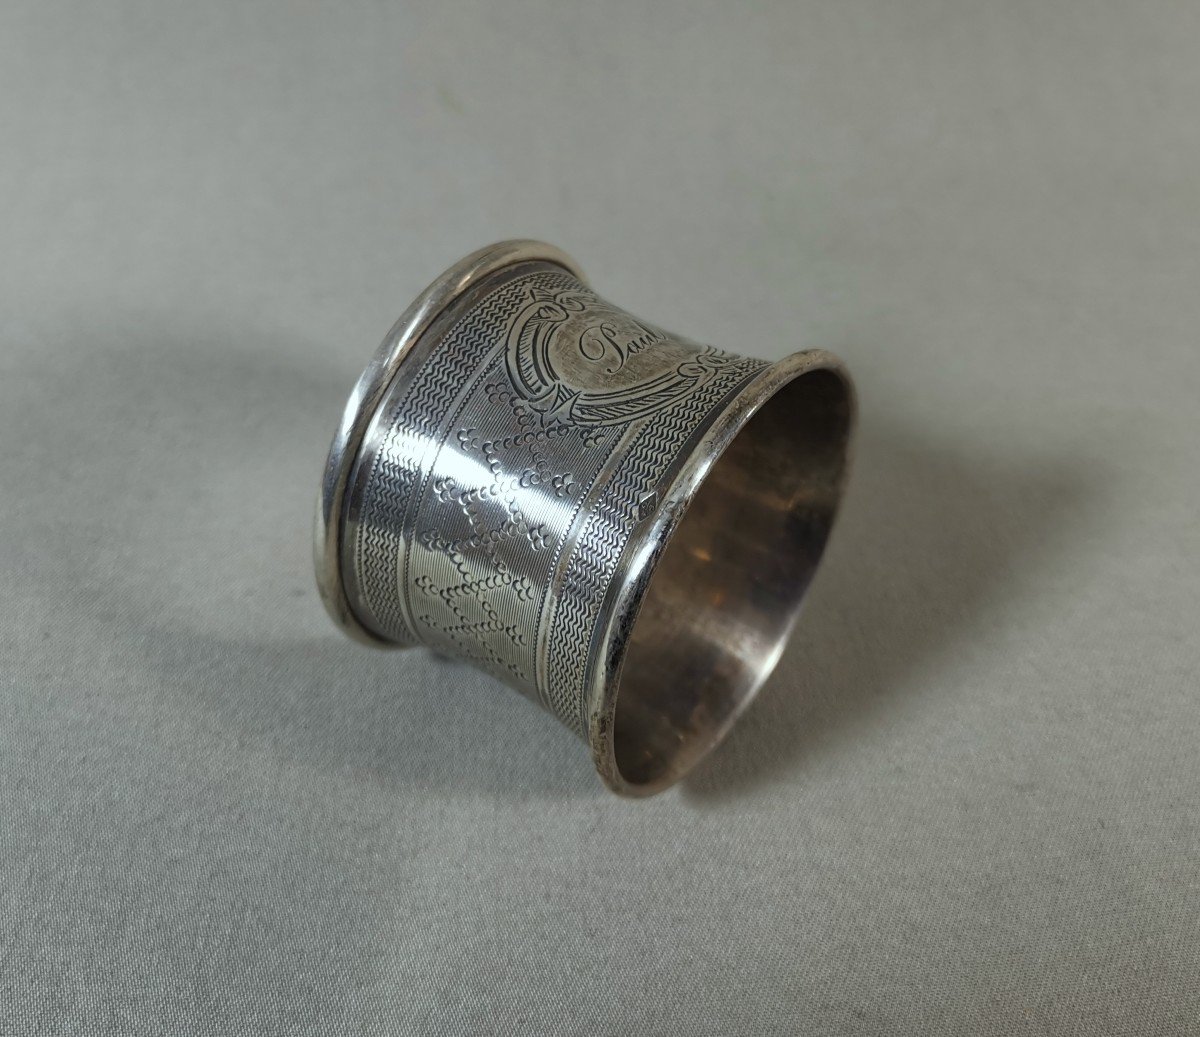 Flowing Or Napkin Ring From The 19th Century In Silver Minerva, Goldsmith César Tonnelier (1845-1882)-photo-2